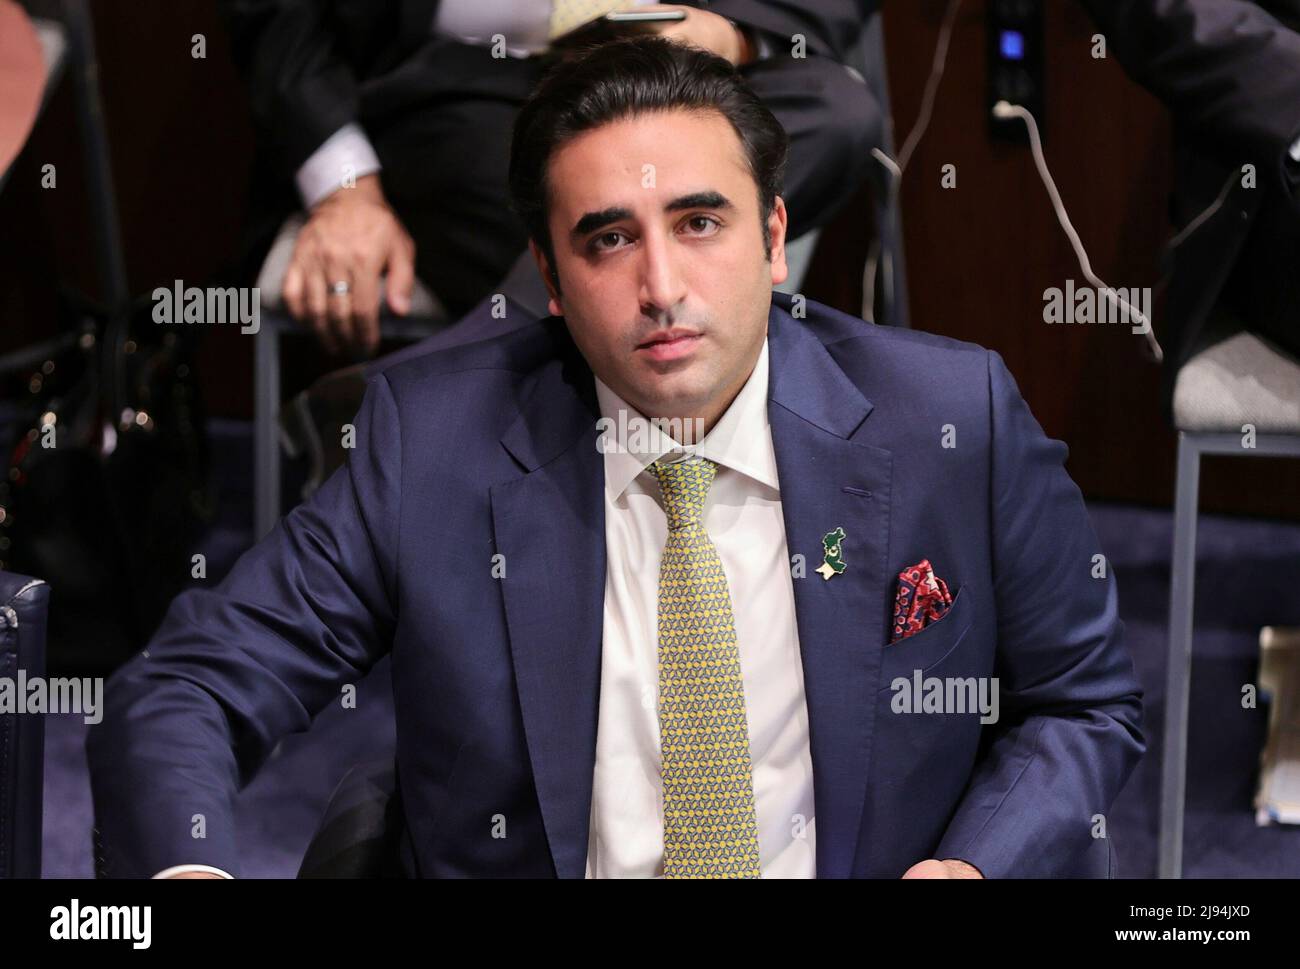 United Nations, New York, USA, May 18, 2022 - Bilawal Bhutto Zardari, Minister for Foreign Affairs of the Islamic Republic of Pakistan During the UN Global Food Security Call to Action Meeting Today at the UN Headquarters in New York City. Photo: Luiz Rampelotto/EuropaNewswire PHOTO CREDIT MANDATORY. Stock Photo